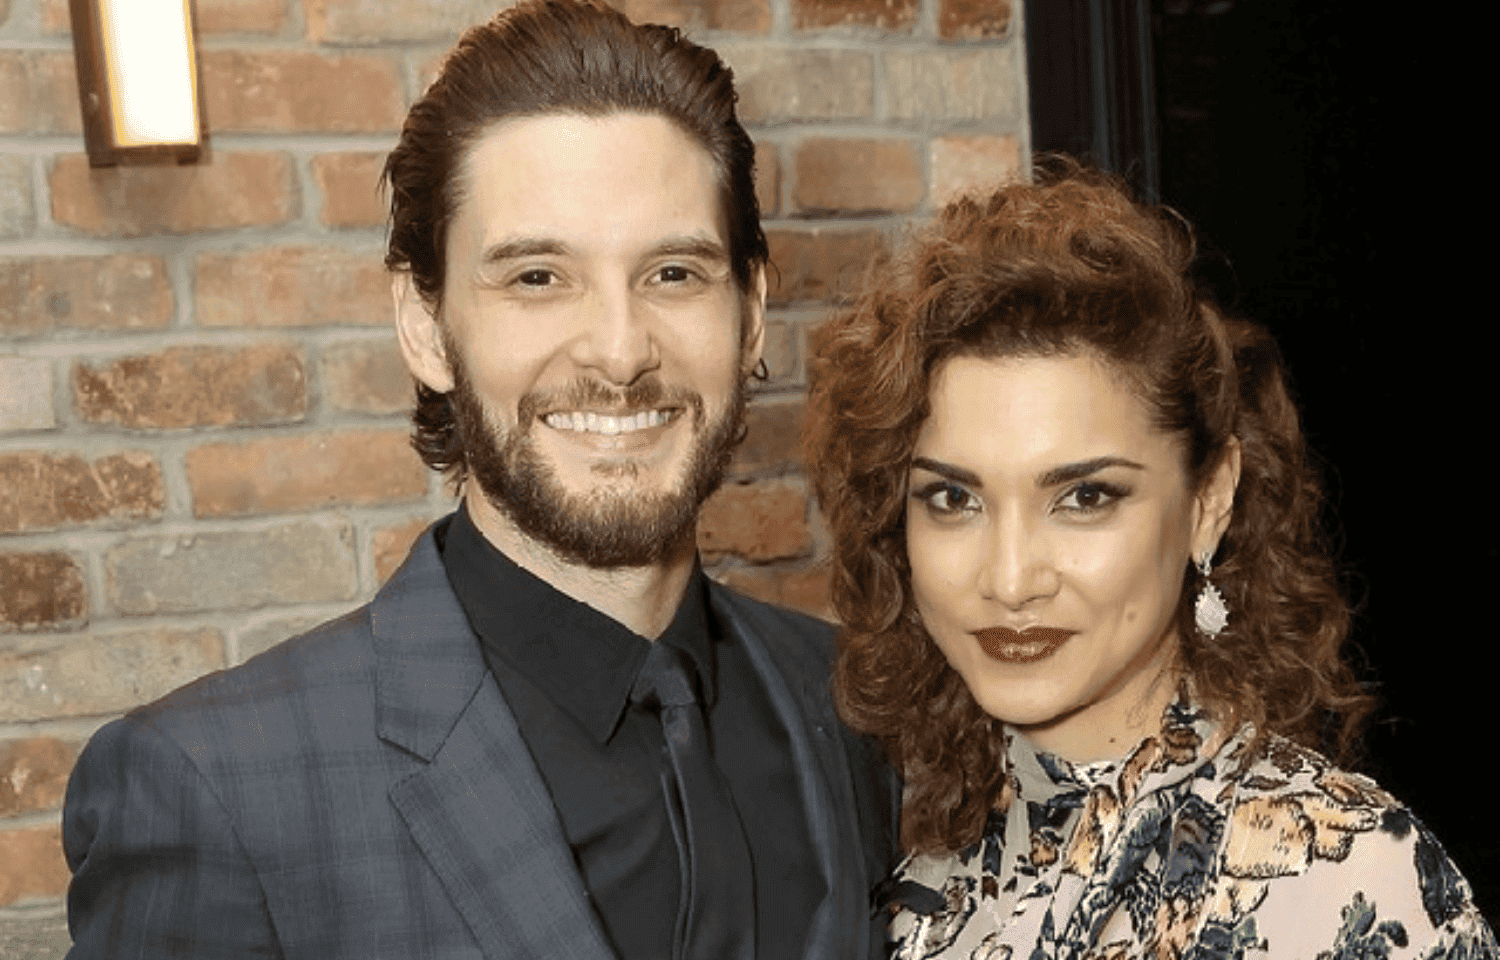 alisa walsh recommends amber rose revah boyfriend pic